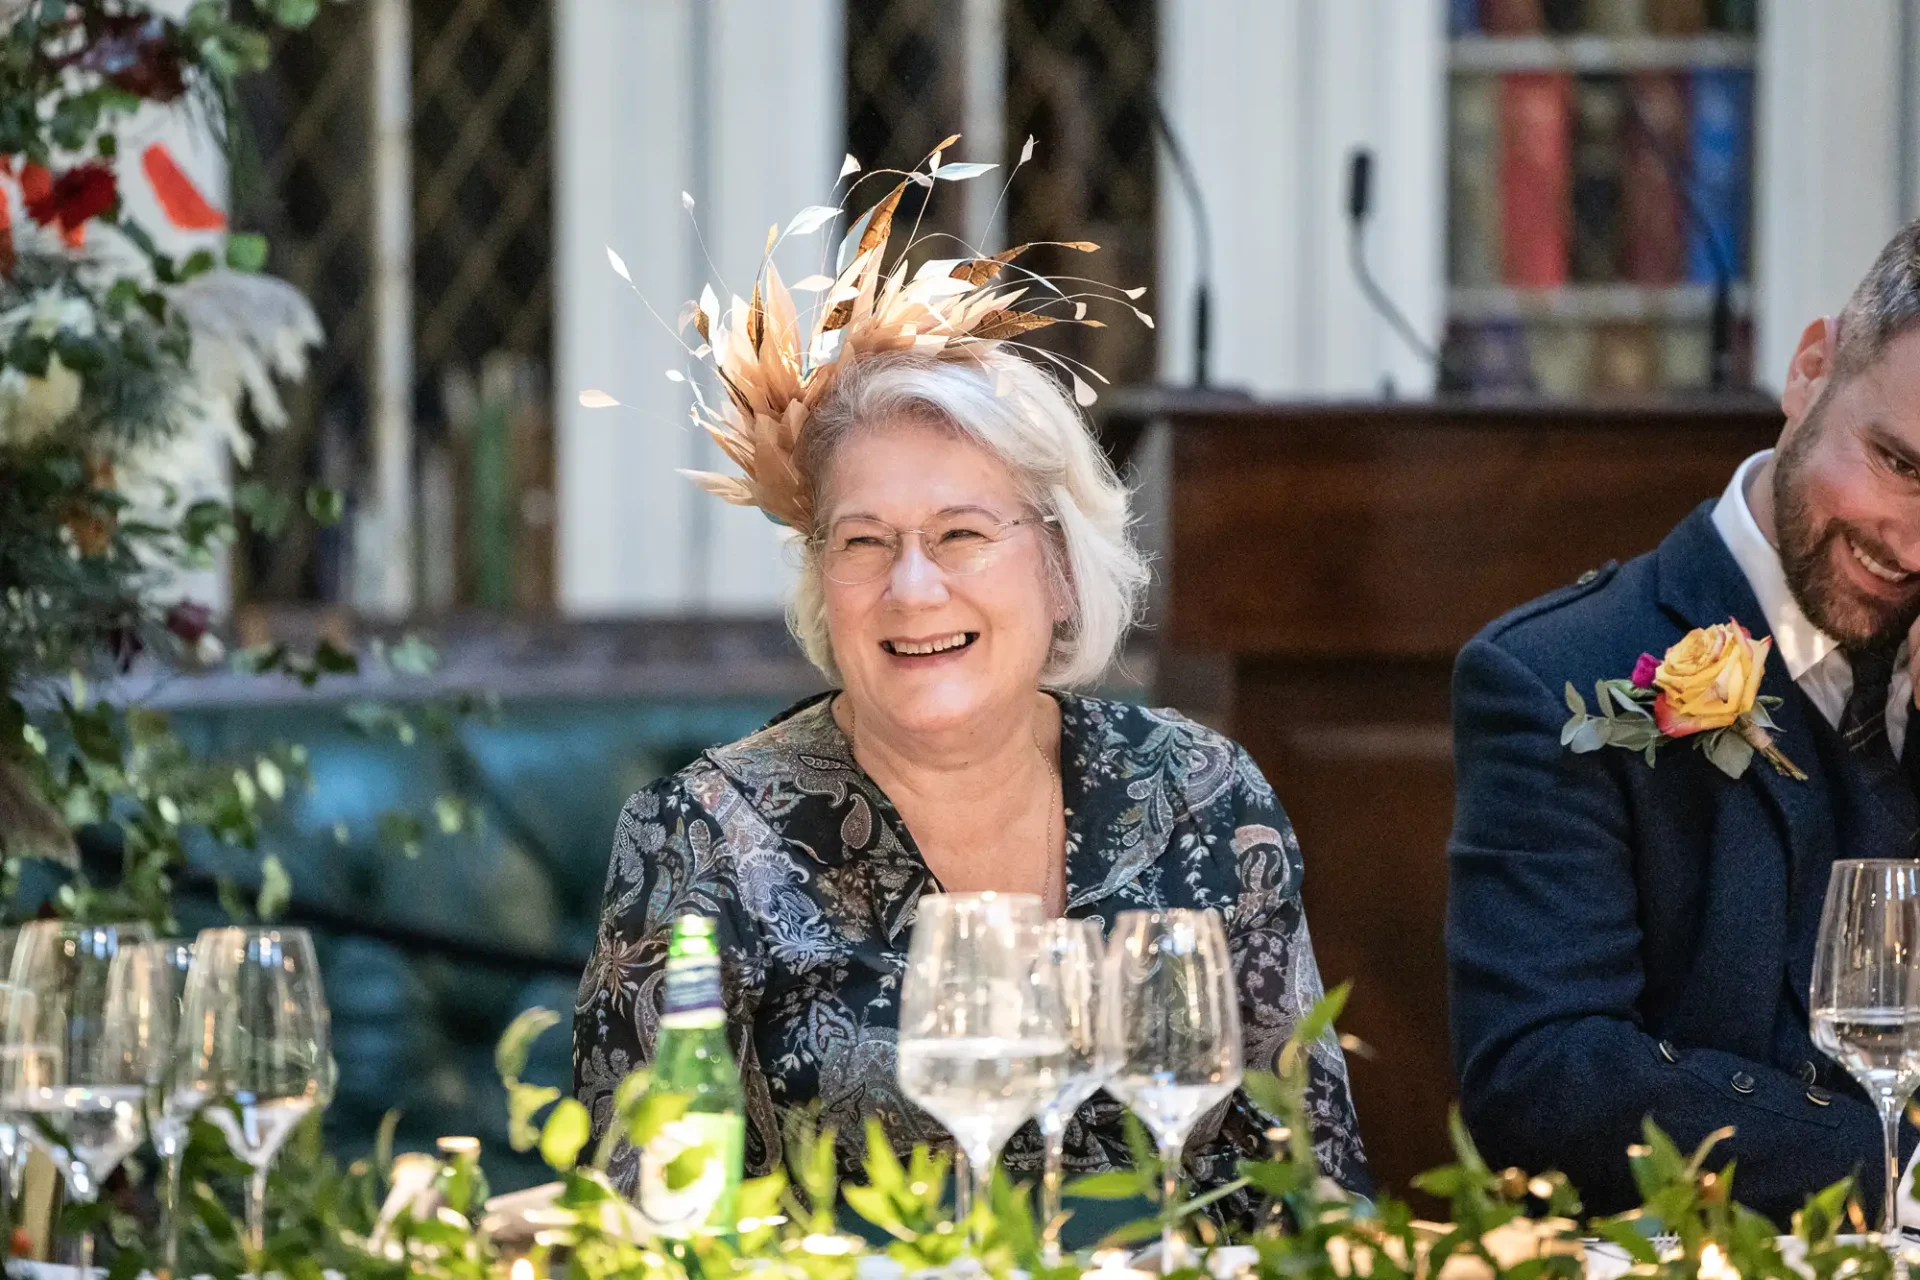 An elderly woman in a floral dress and feathered hat laughs joyfully at a wedding reception table, beside a smiling man in a suit with a boutonniere.